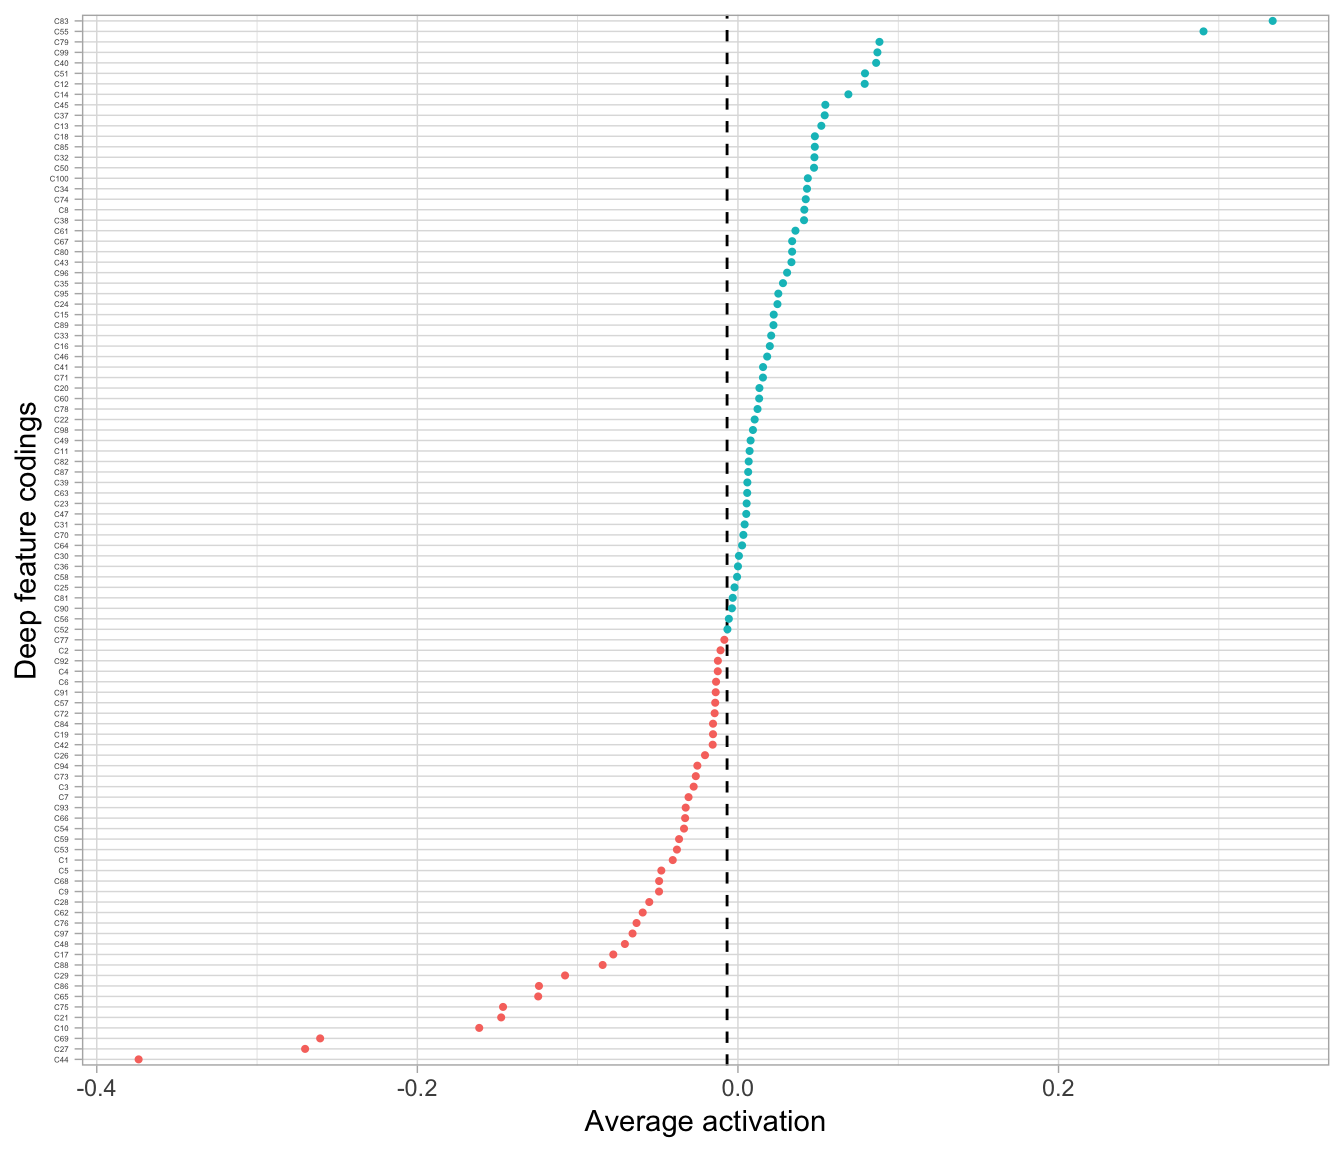 The average activation of the coding neurons in our default autoencoder using a Tanh activation function.